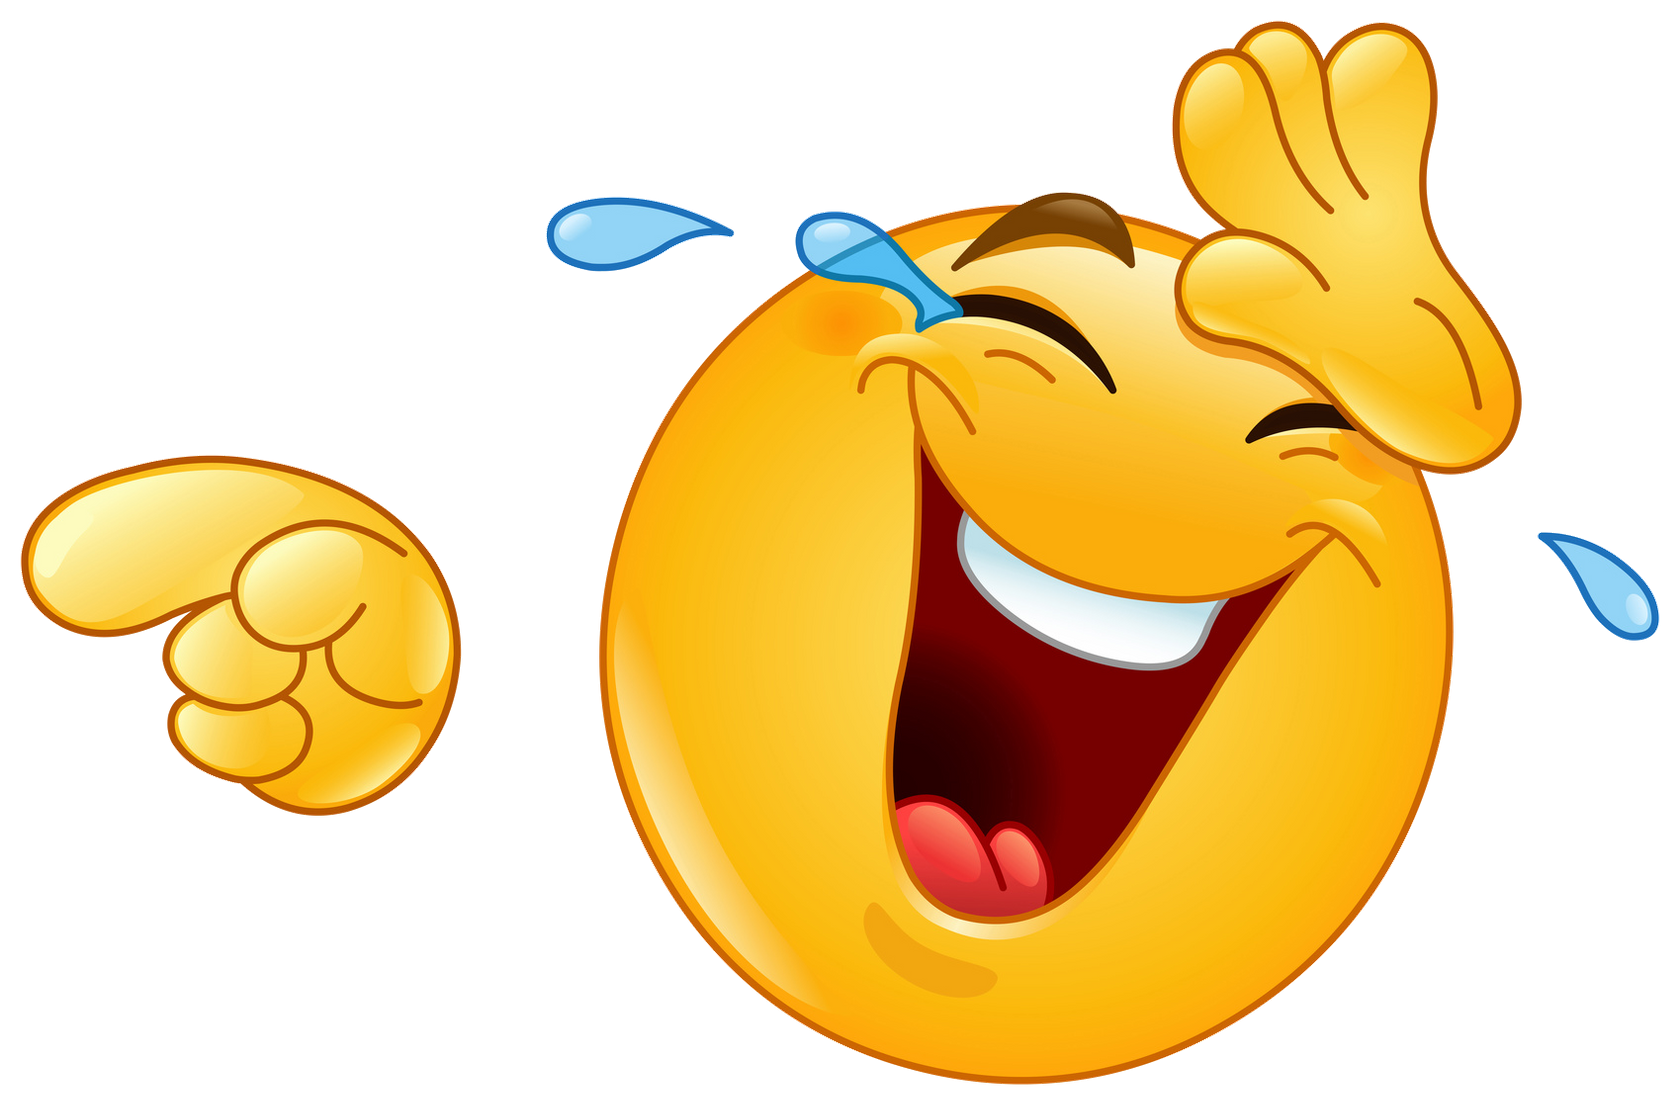 Emoticon Smiley Laughter Laughing Lol PNG Image High Quality Clipart